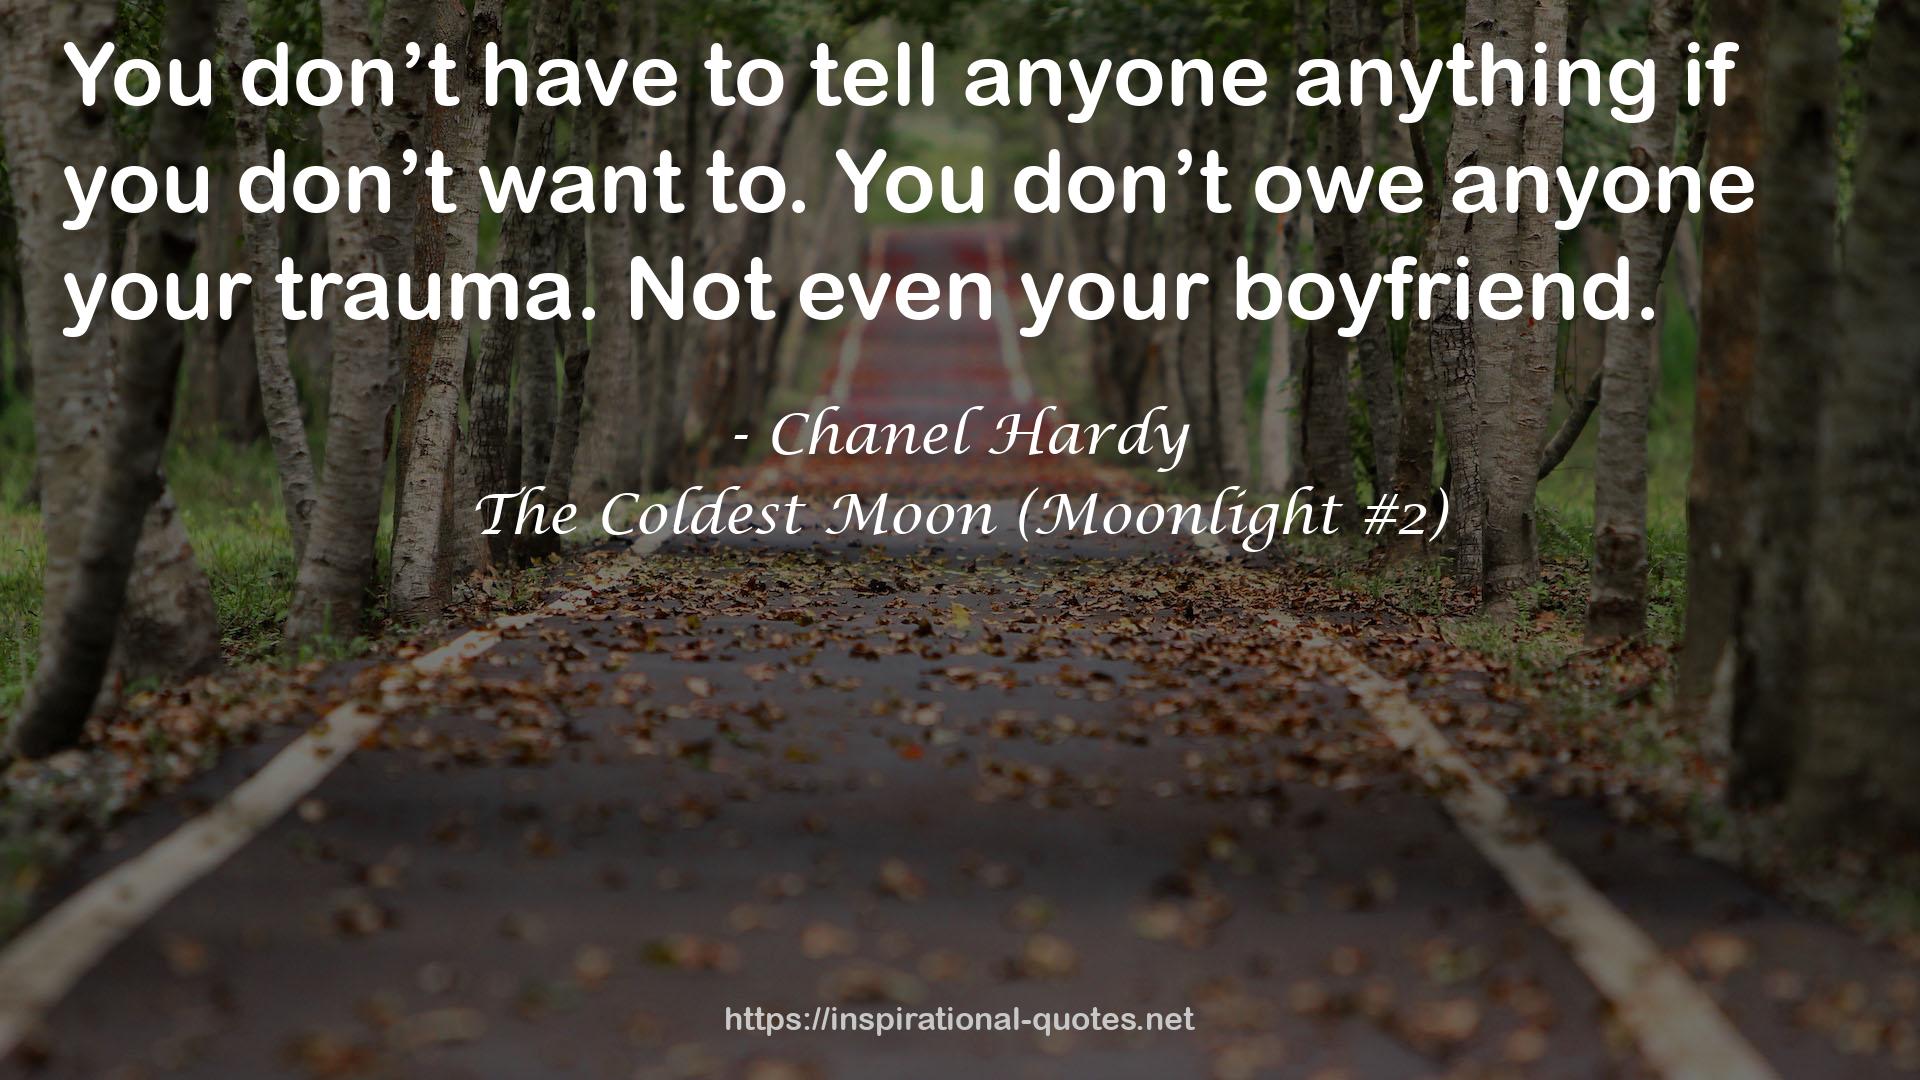 The Coldest Moon (Moonlight #2) QUOTES